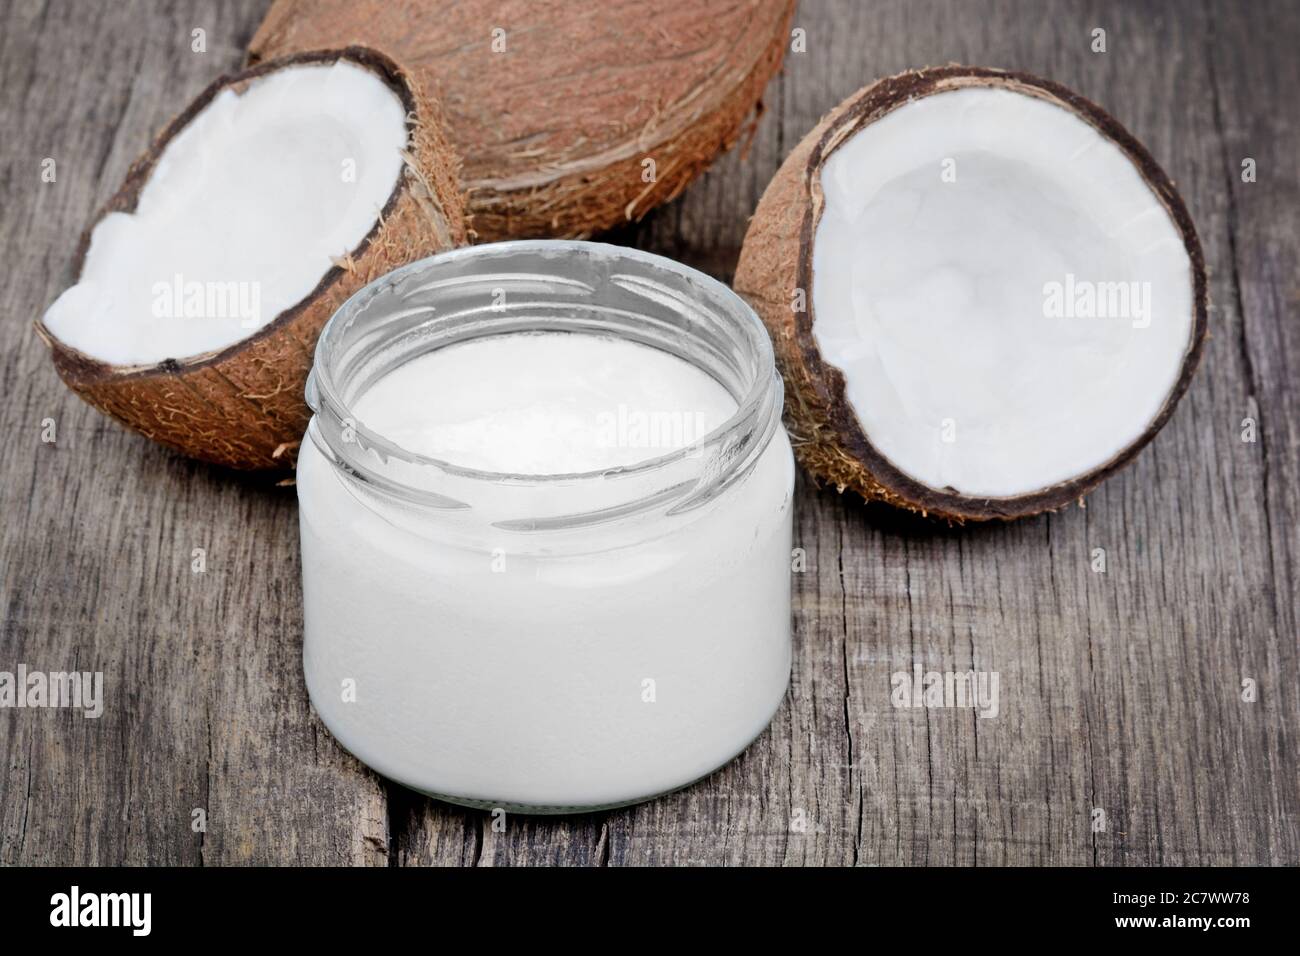 Coconut oil in a jar and coconut fruits on old wood table Stock Photo